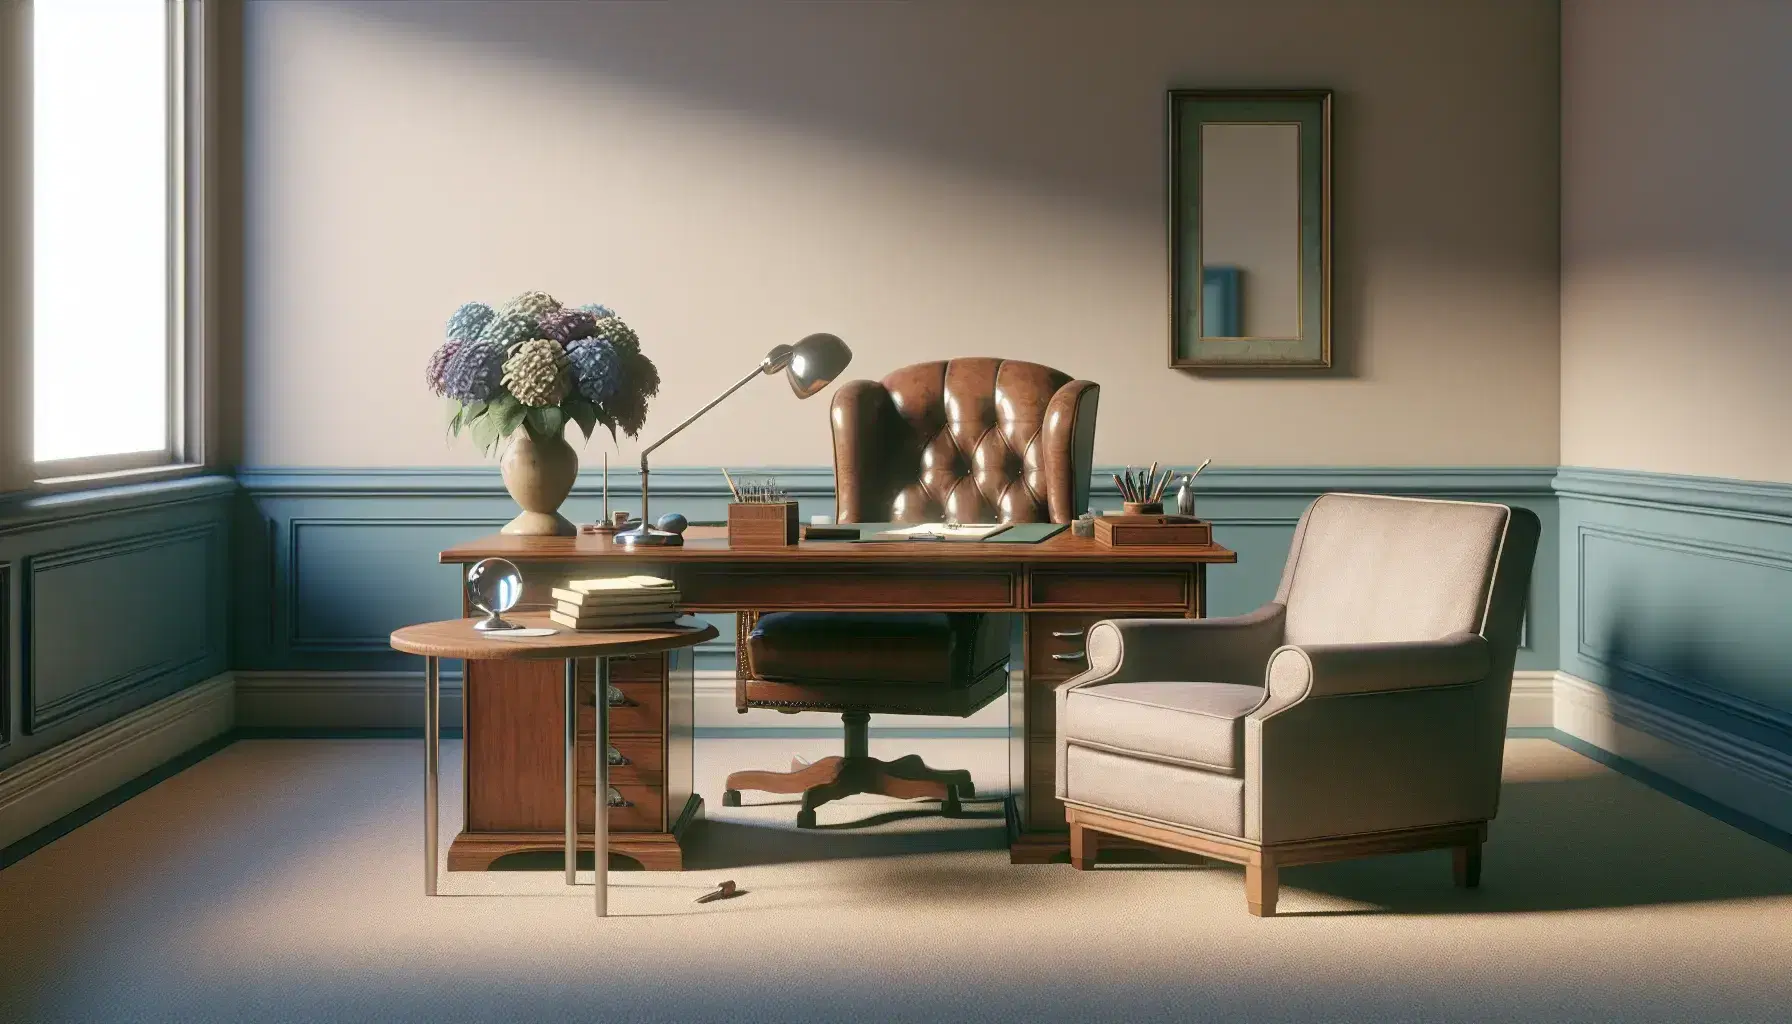 Psychologist office with wooden desk, leather chair, patient chair in neutral fabric, coffee table with flower vase and floor lamp.